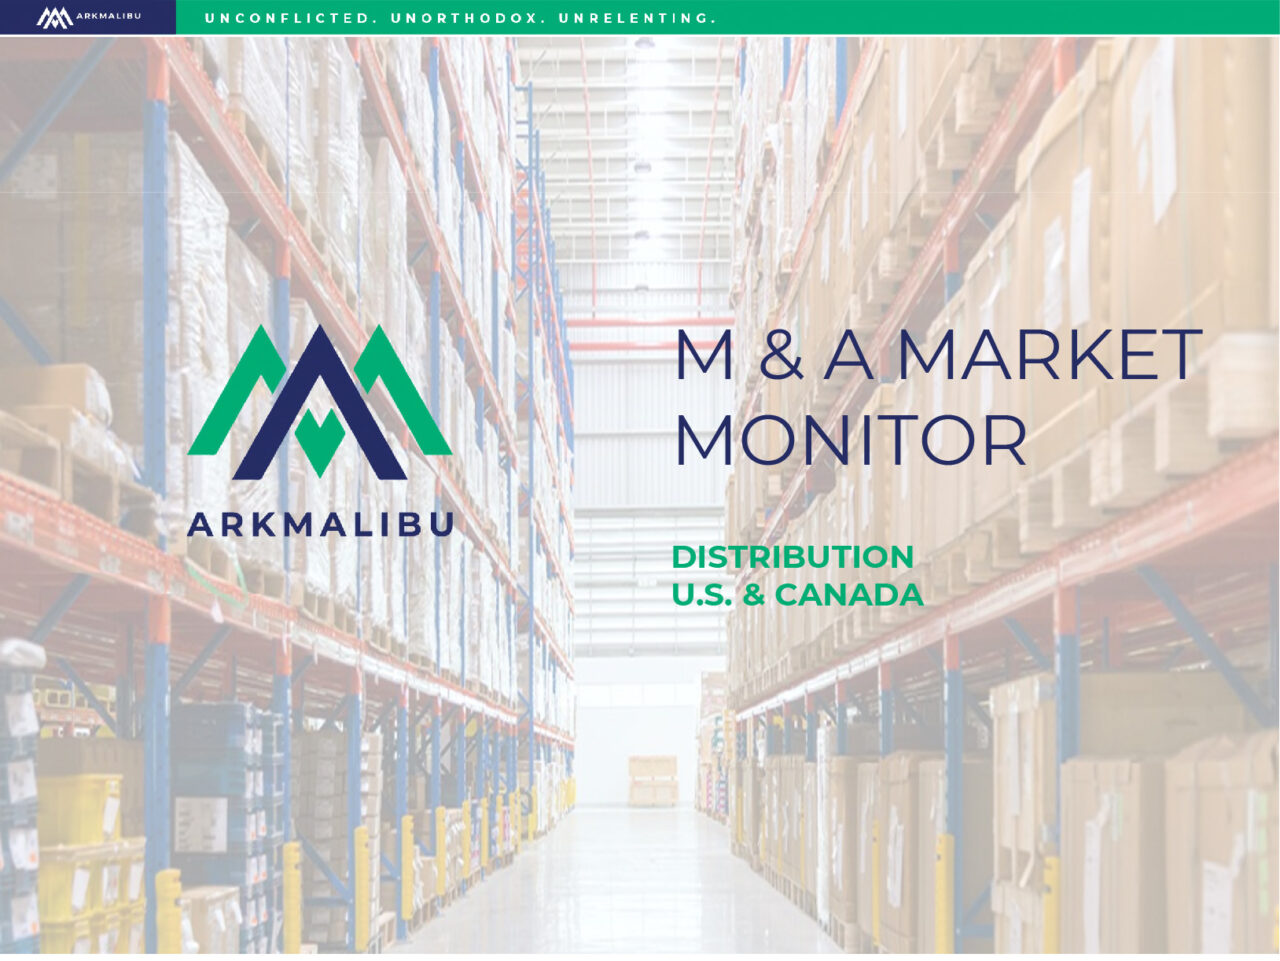 Market Monitor Cover for Distribution. Faded Image of an aisle in a warehouse in the background